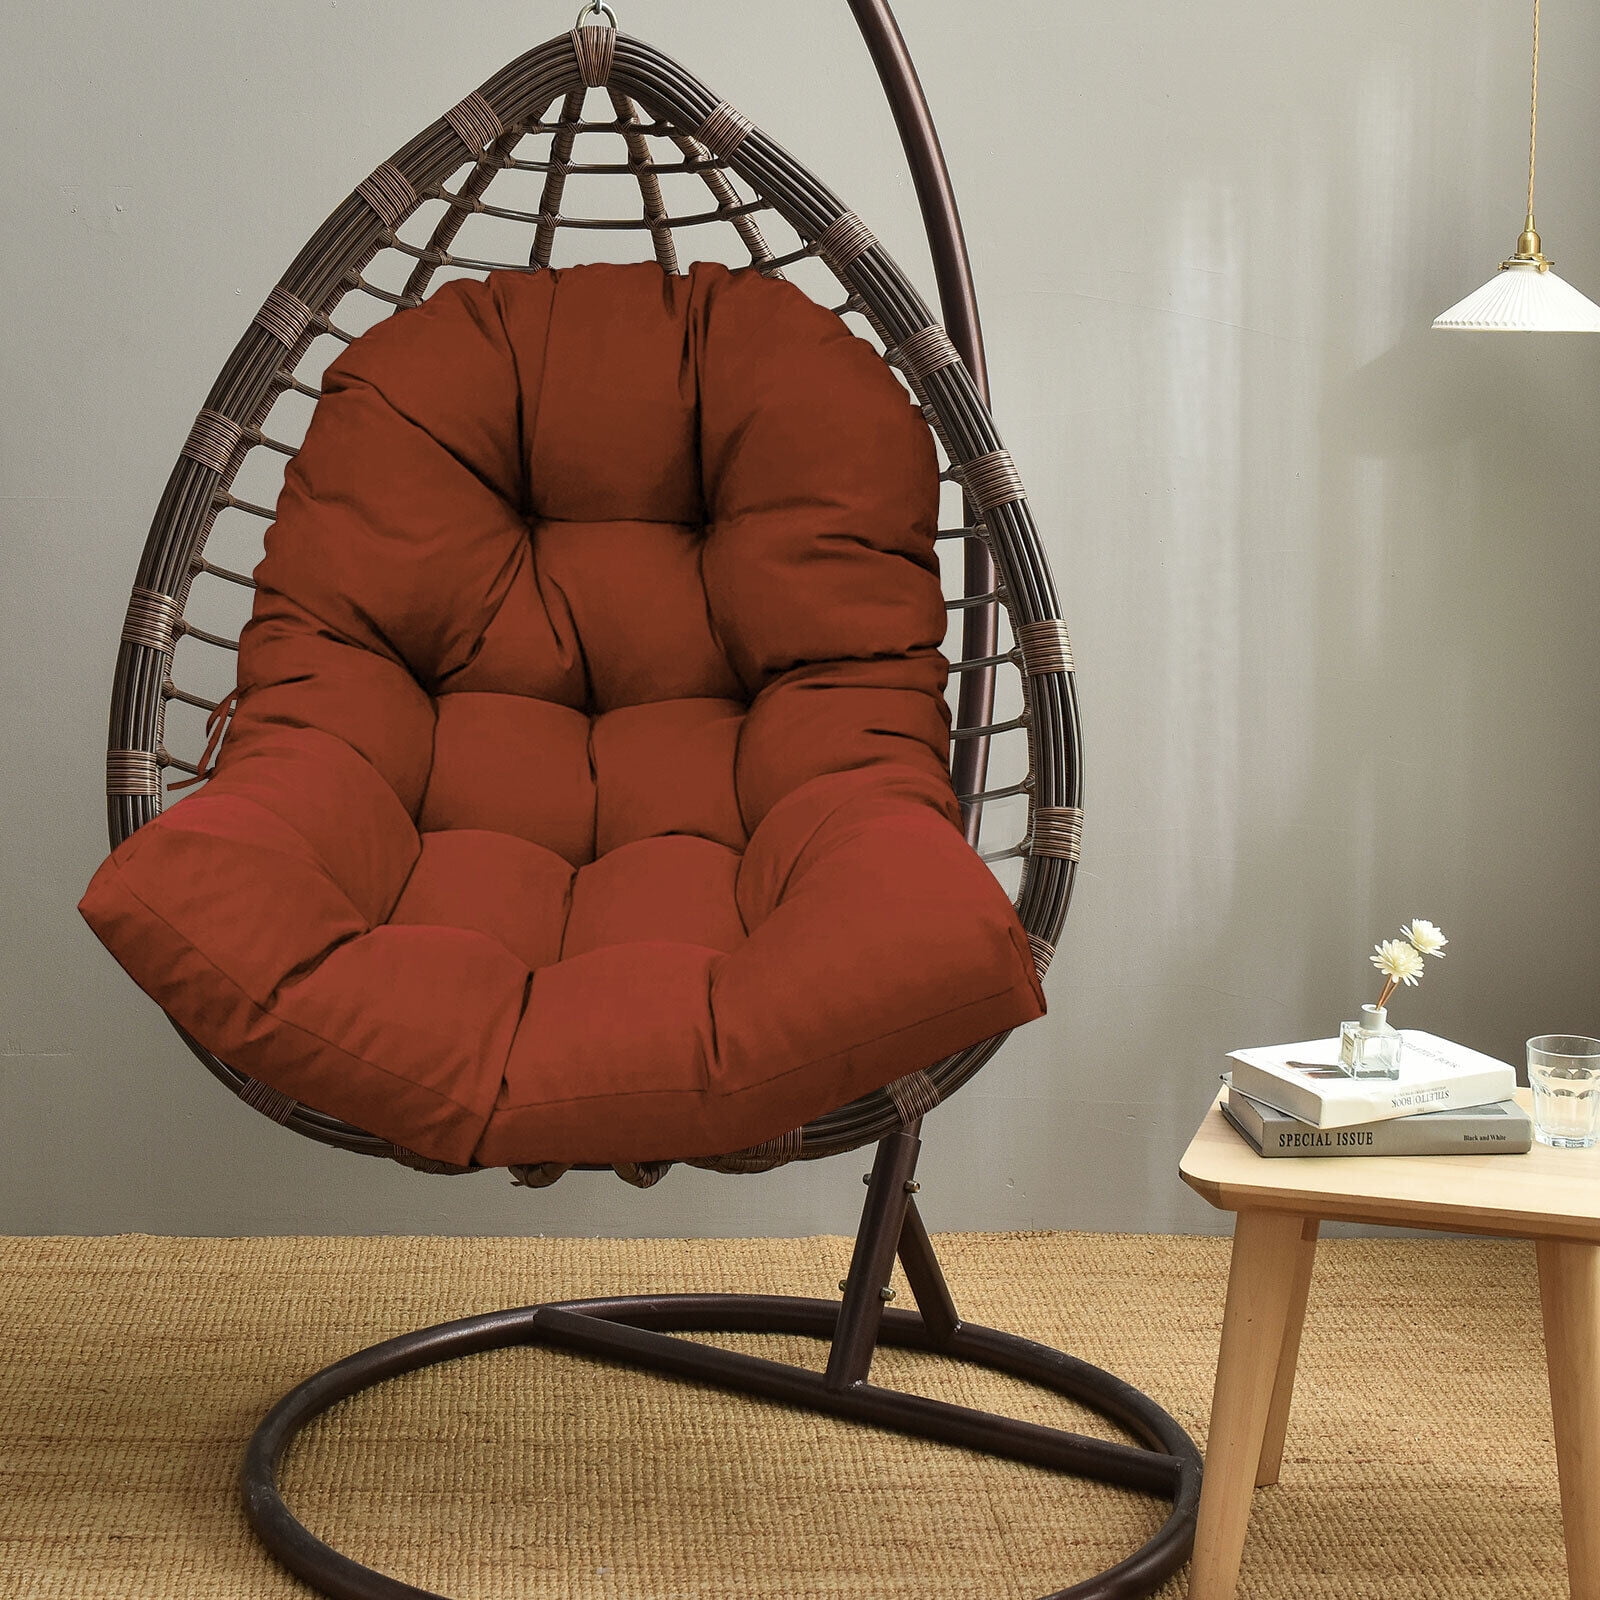 OA&WA Hanging Basket Chair Cushions, Large Seat Cushion Waterproof Hanging  Egg Hammock Swing Chair Pads Soft Chair Back Solid Color (Color : Brown